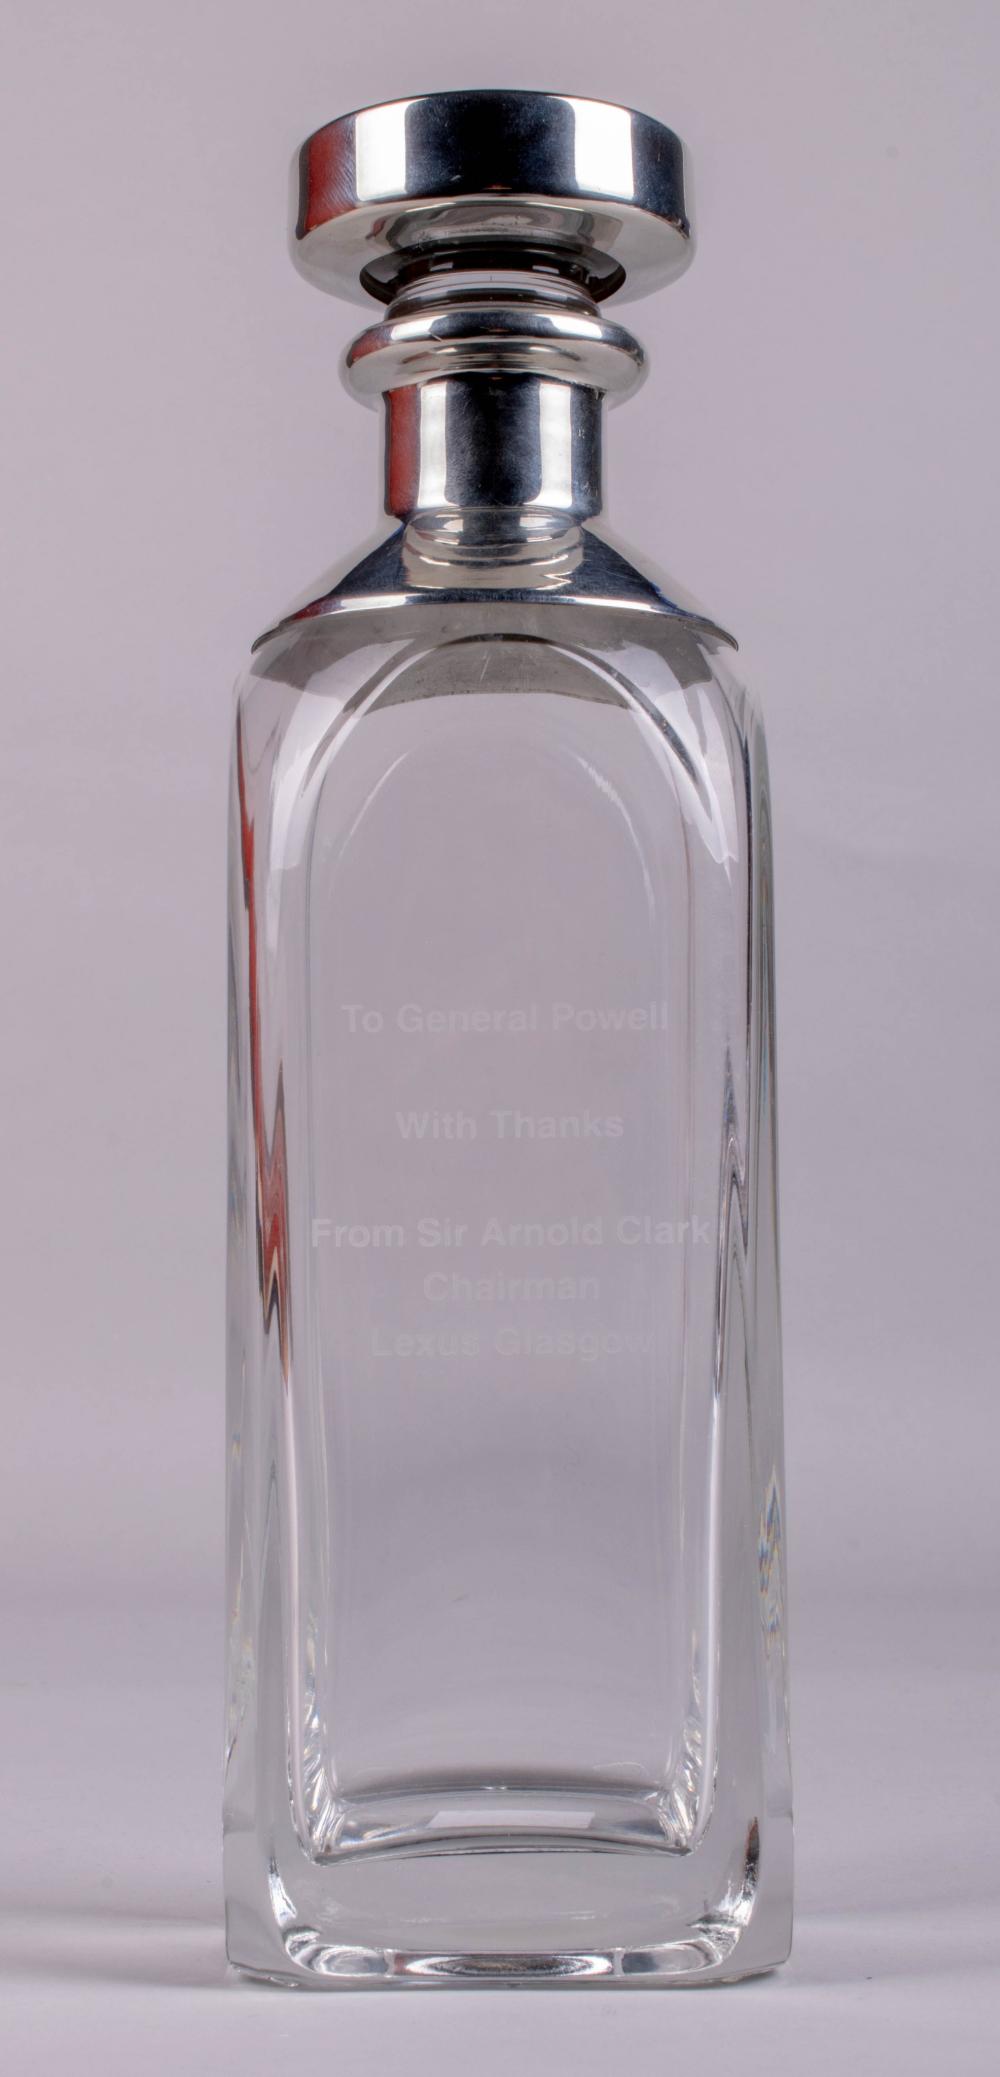 GLASS DECANTER PRESENTED TO GENERAL 33d256